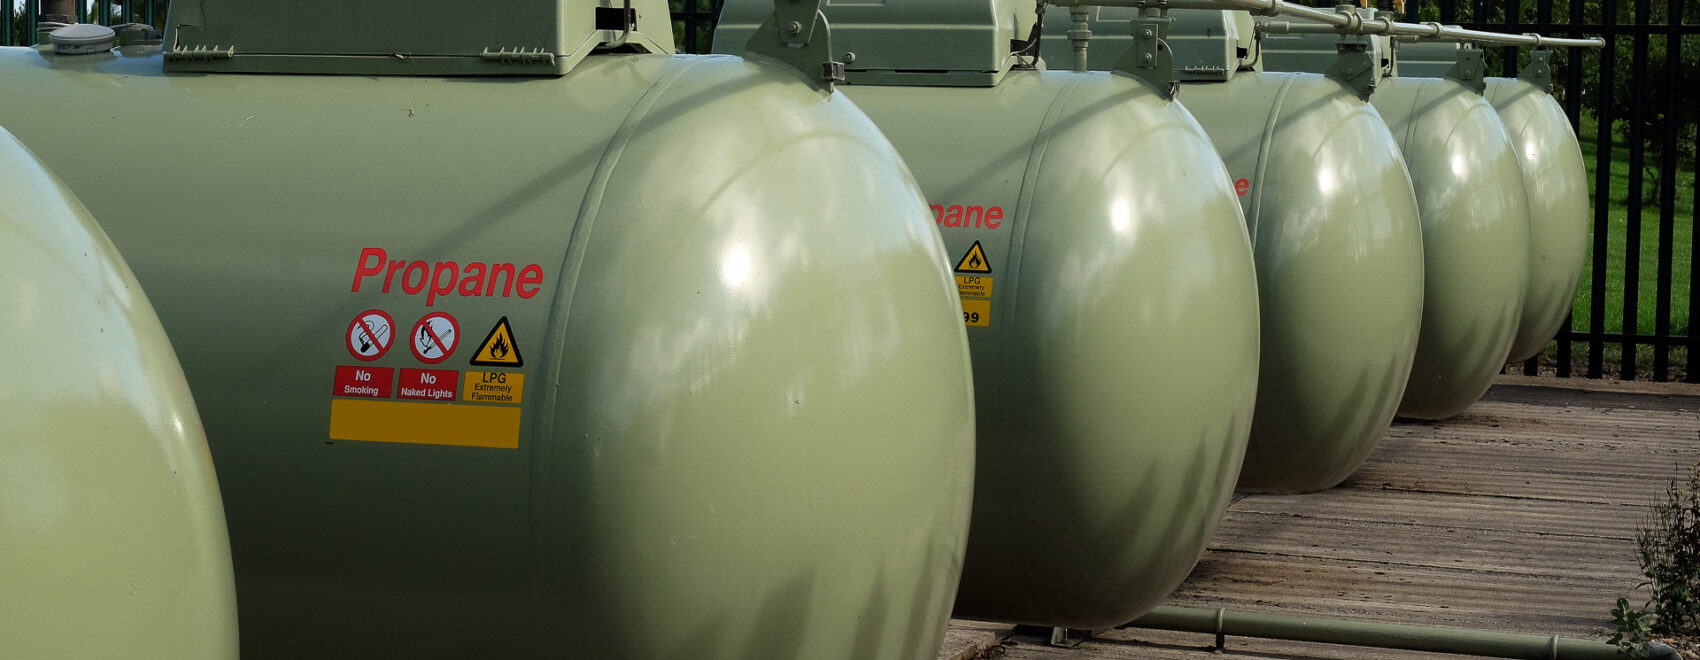 Large Propane gas tank farm on commercial and residential caravan